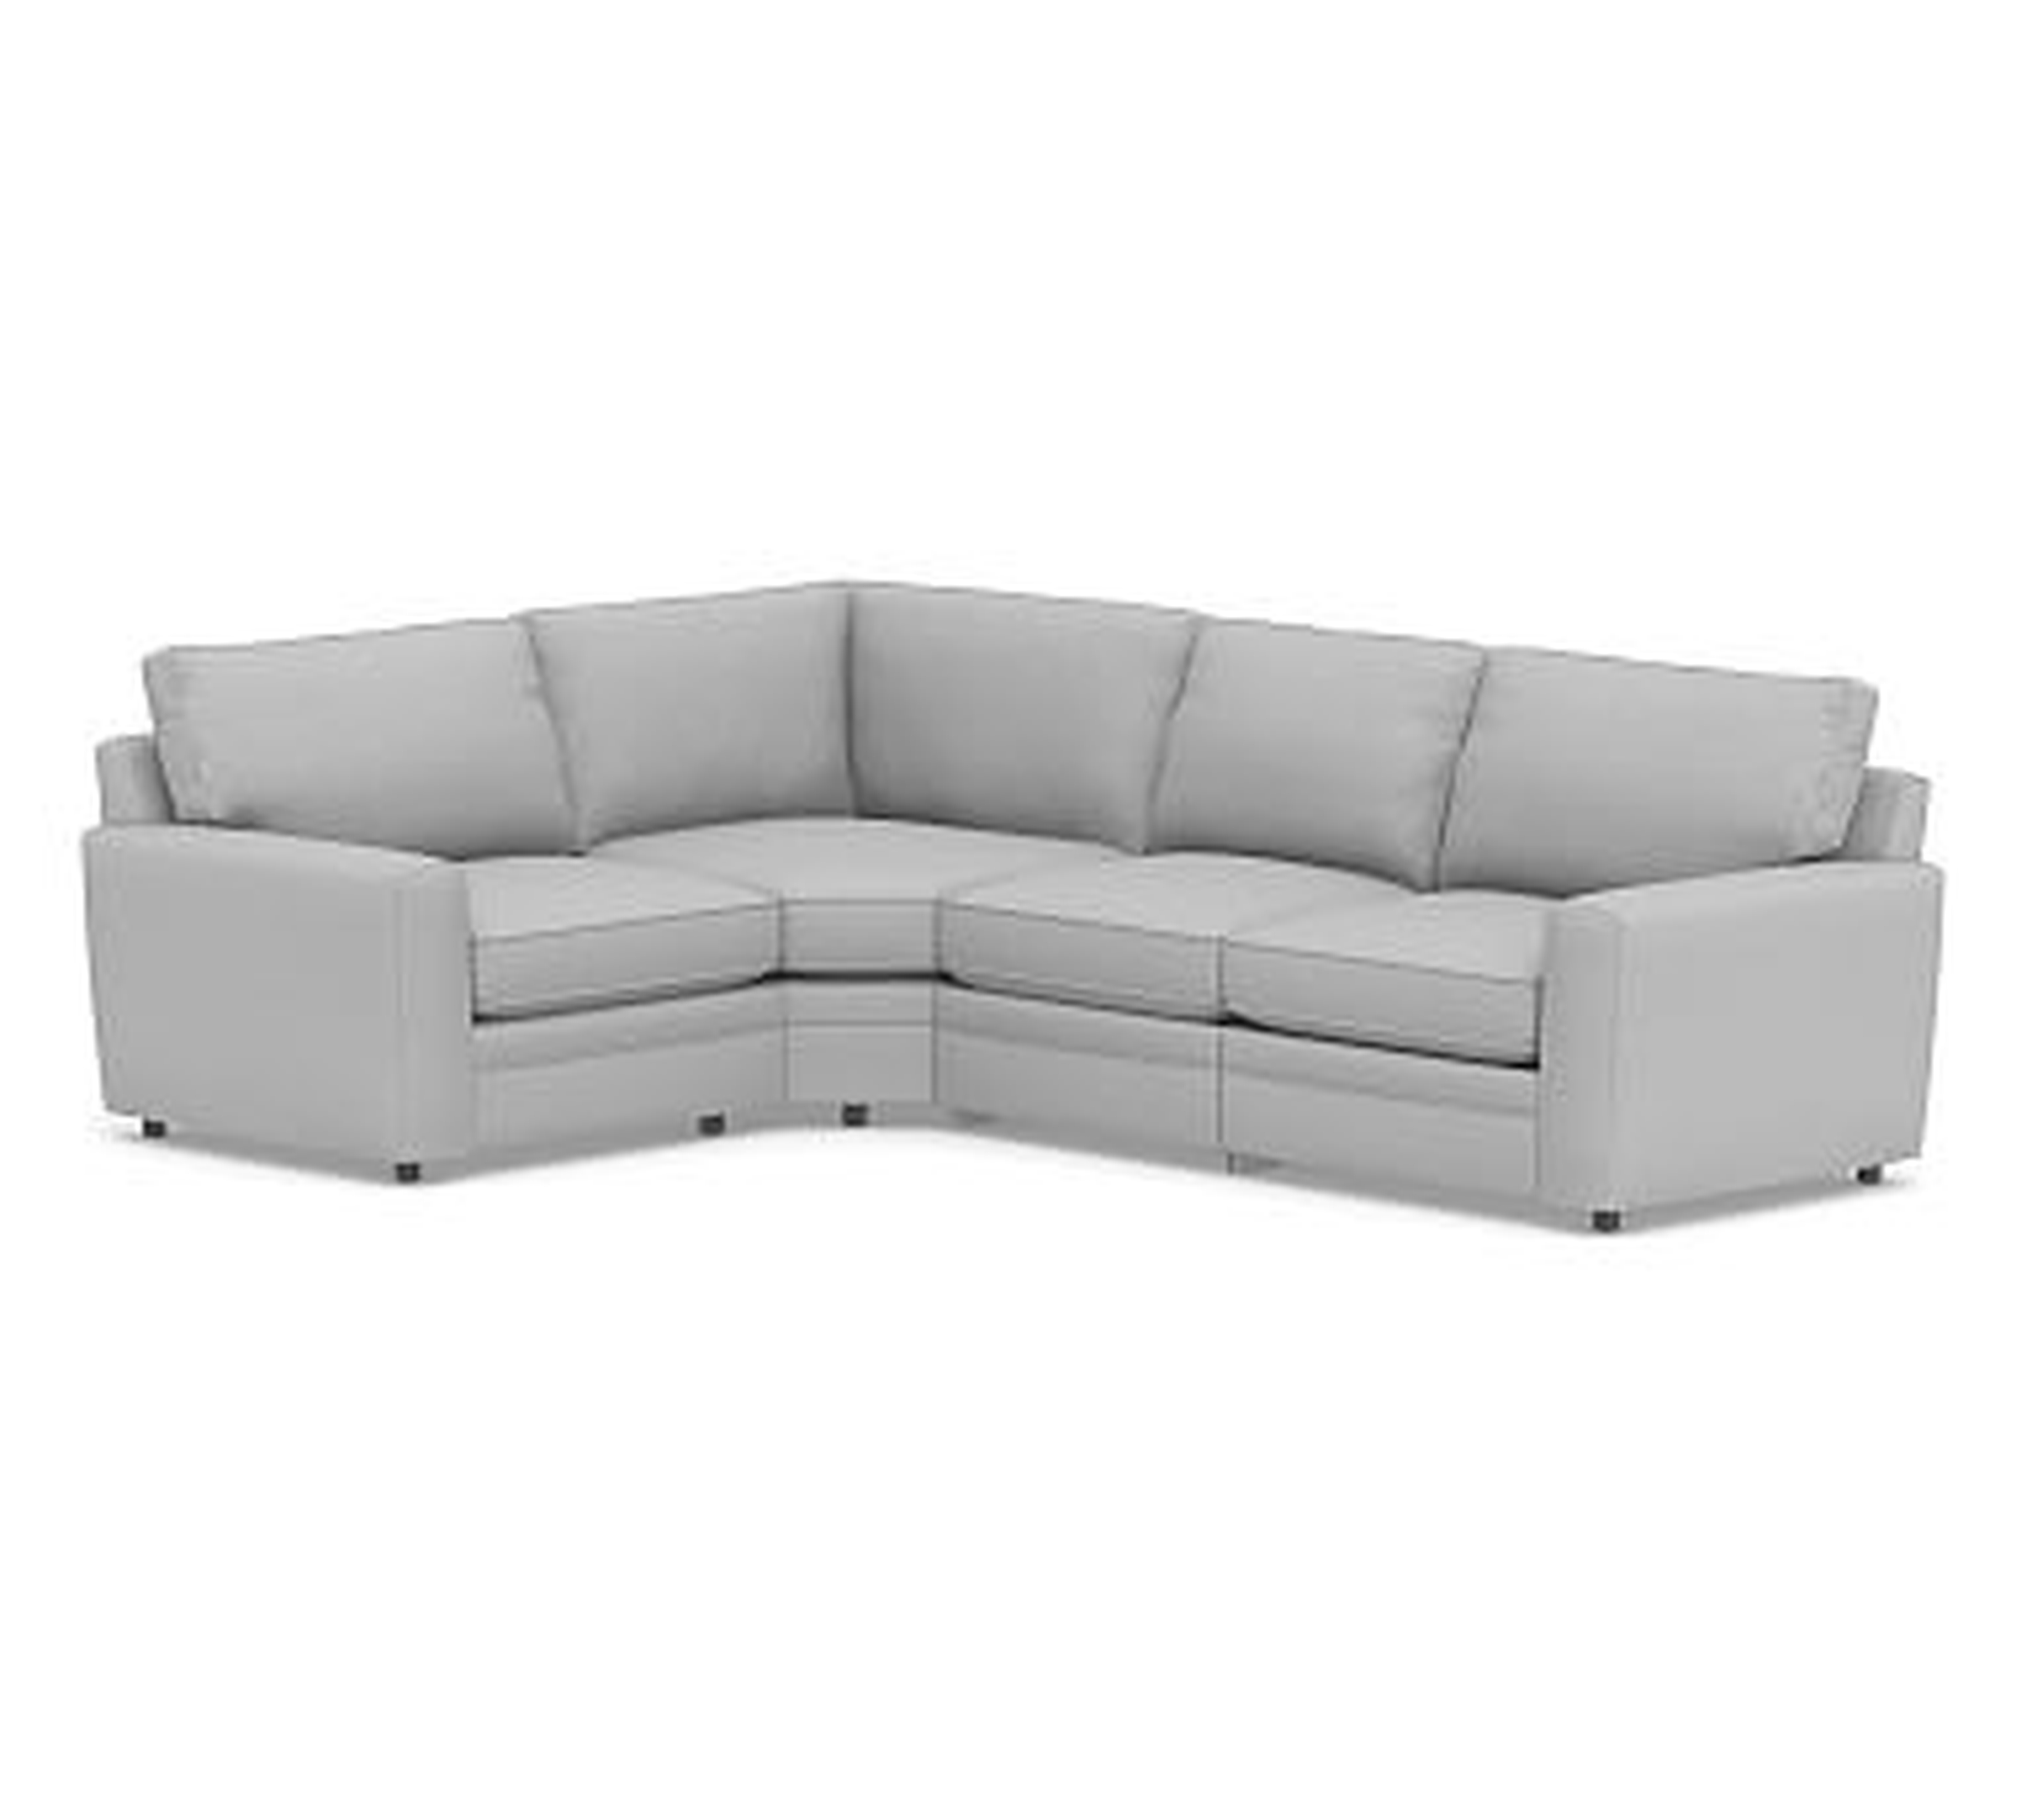 Pearce Square Arm Upholstered Right Arm 4-Piece Reclining Wedge Sectional, Down Blend Wrapped Cushions, Brushed Crossweave Light Gray - Pottery Barn